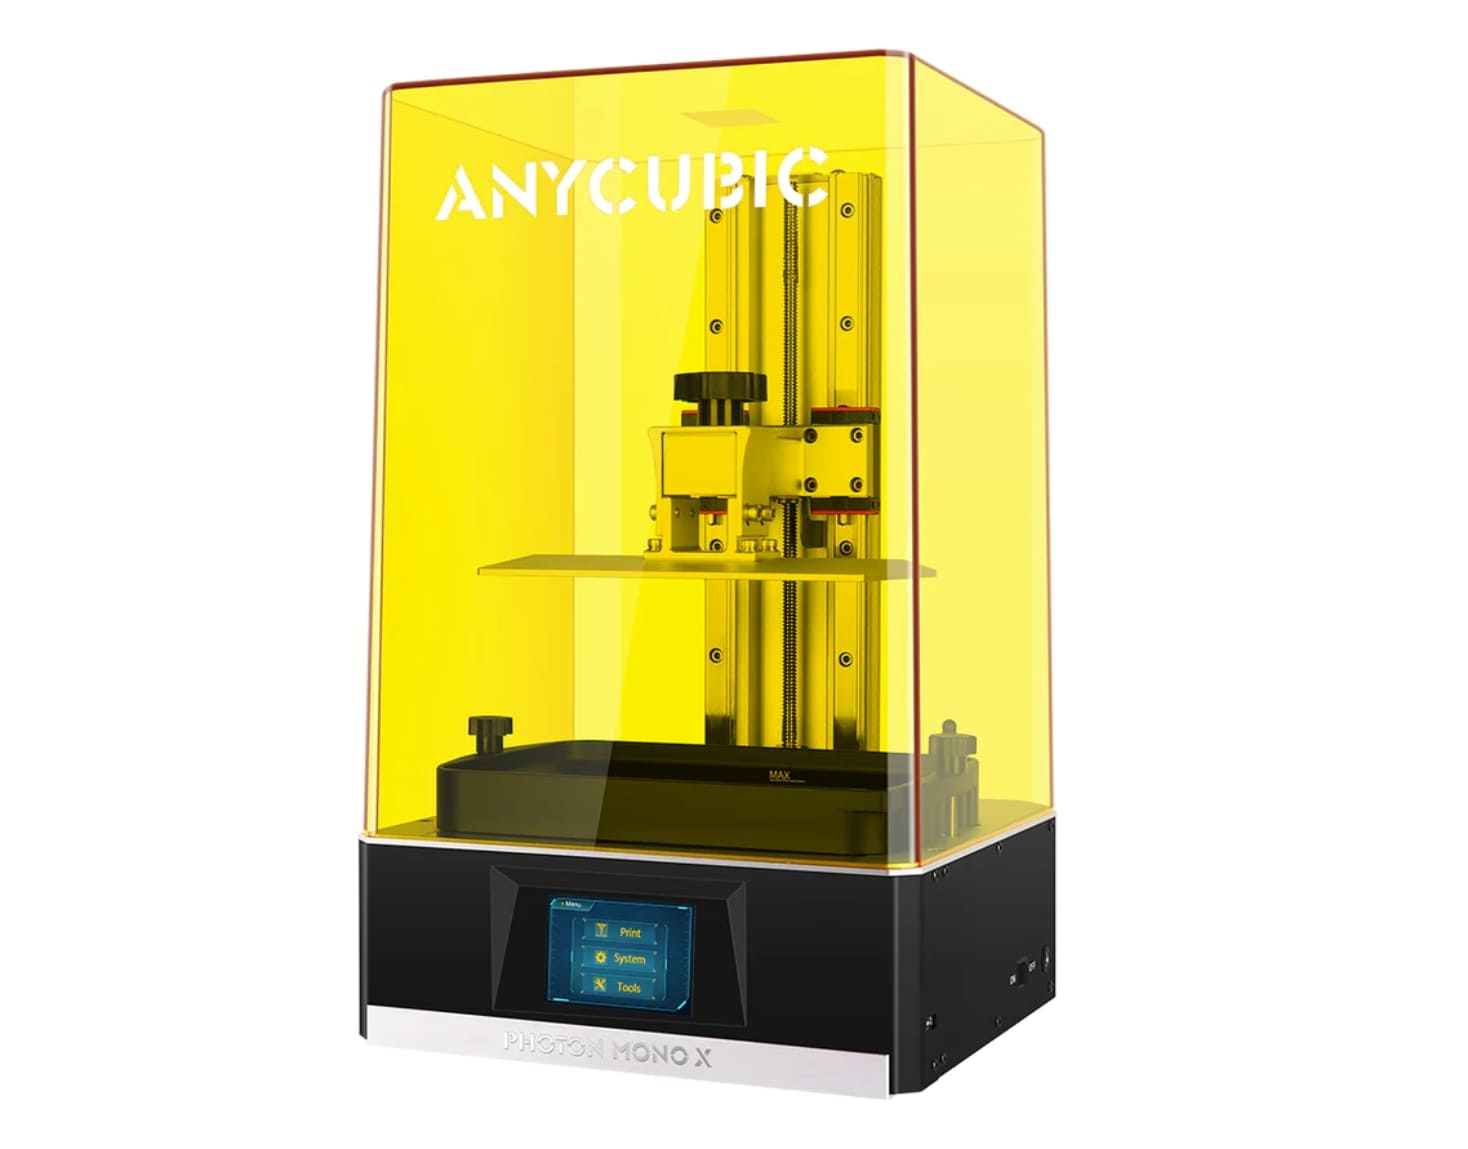 Anycubic Photon Mono X-Credit from Anycubic